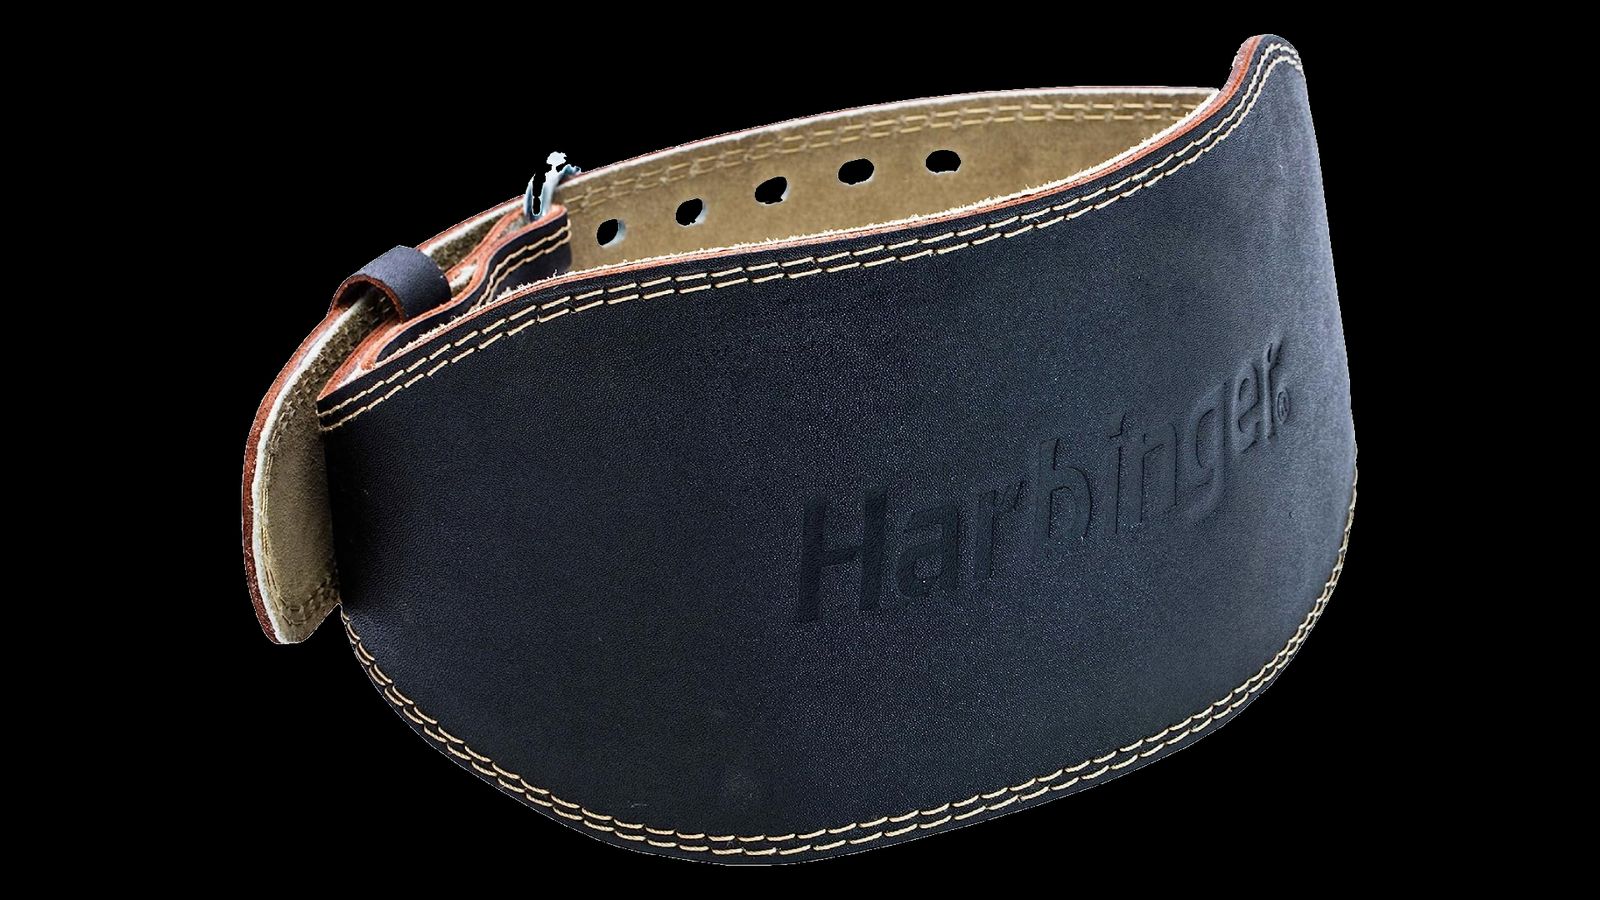 Harbinger Weightlifting Belt product image of a black leather belt with a brown inner lining.